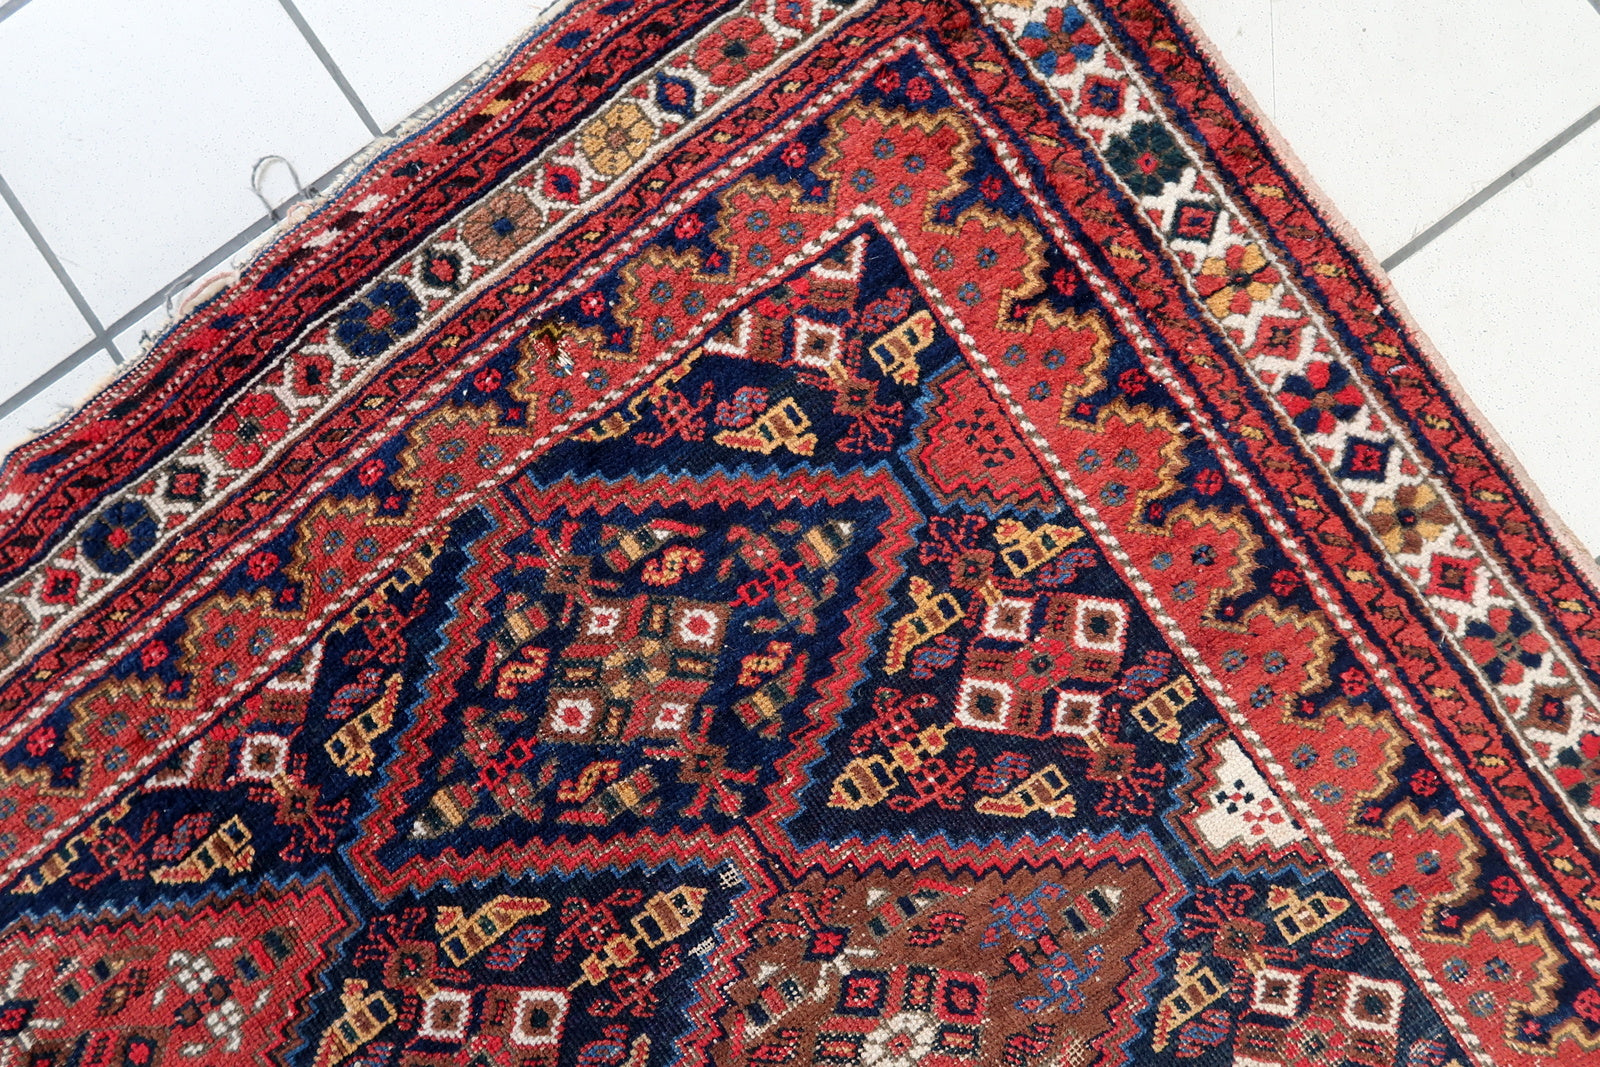 Handmade antique Persian rug from Afshar region. The rug is from the beginning of 20th century in distressed condition.